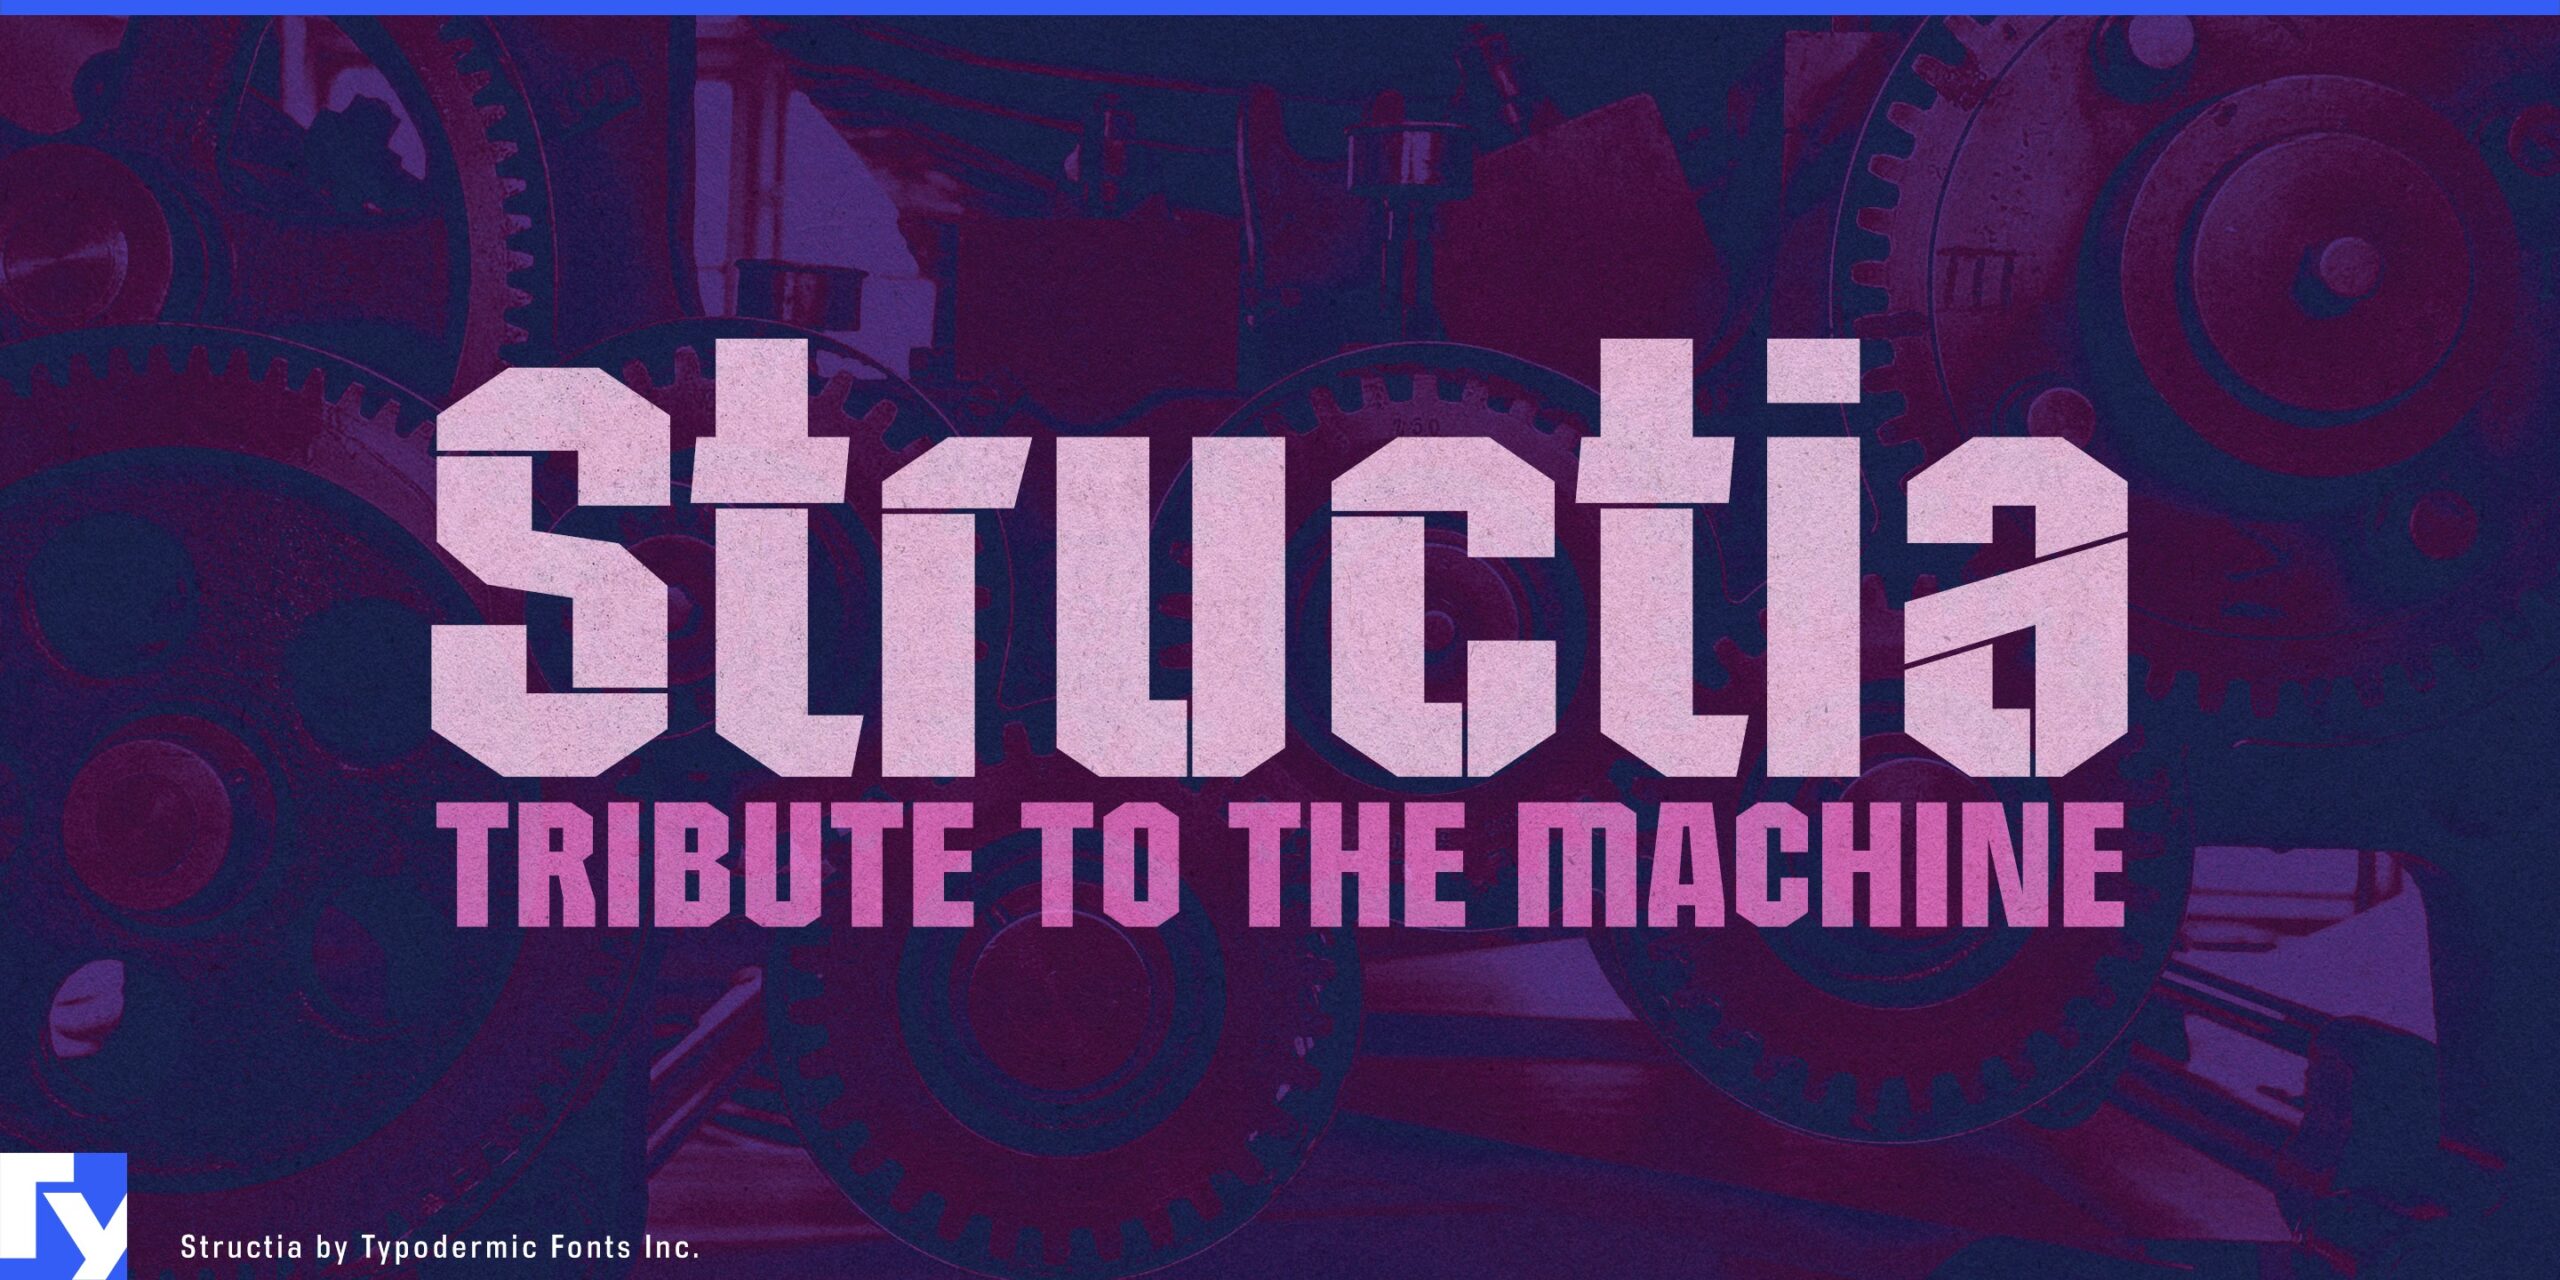 Stand out from the crowd with the unique allure of Structia typography.